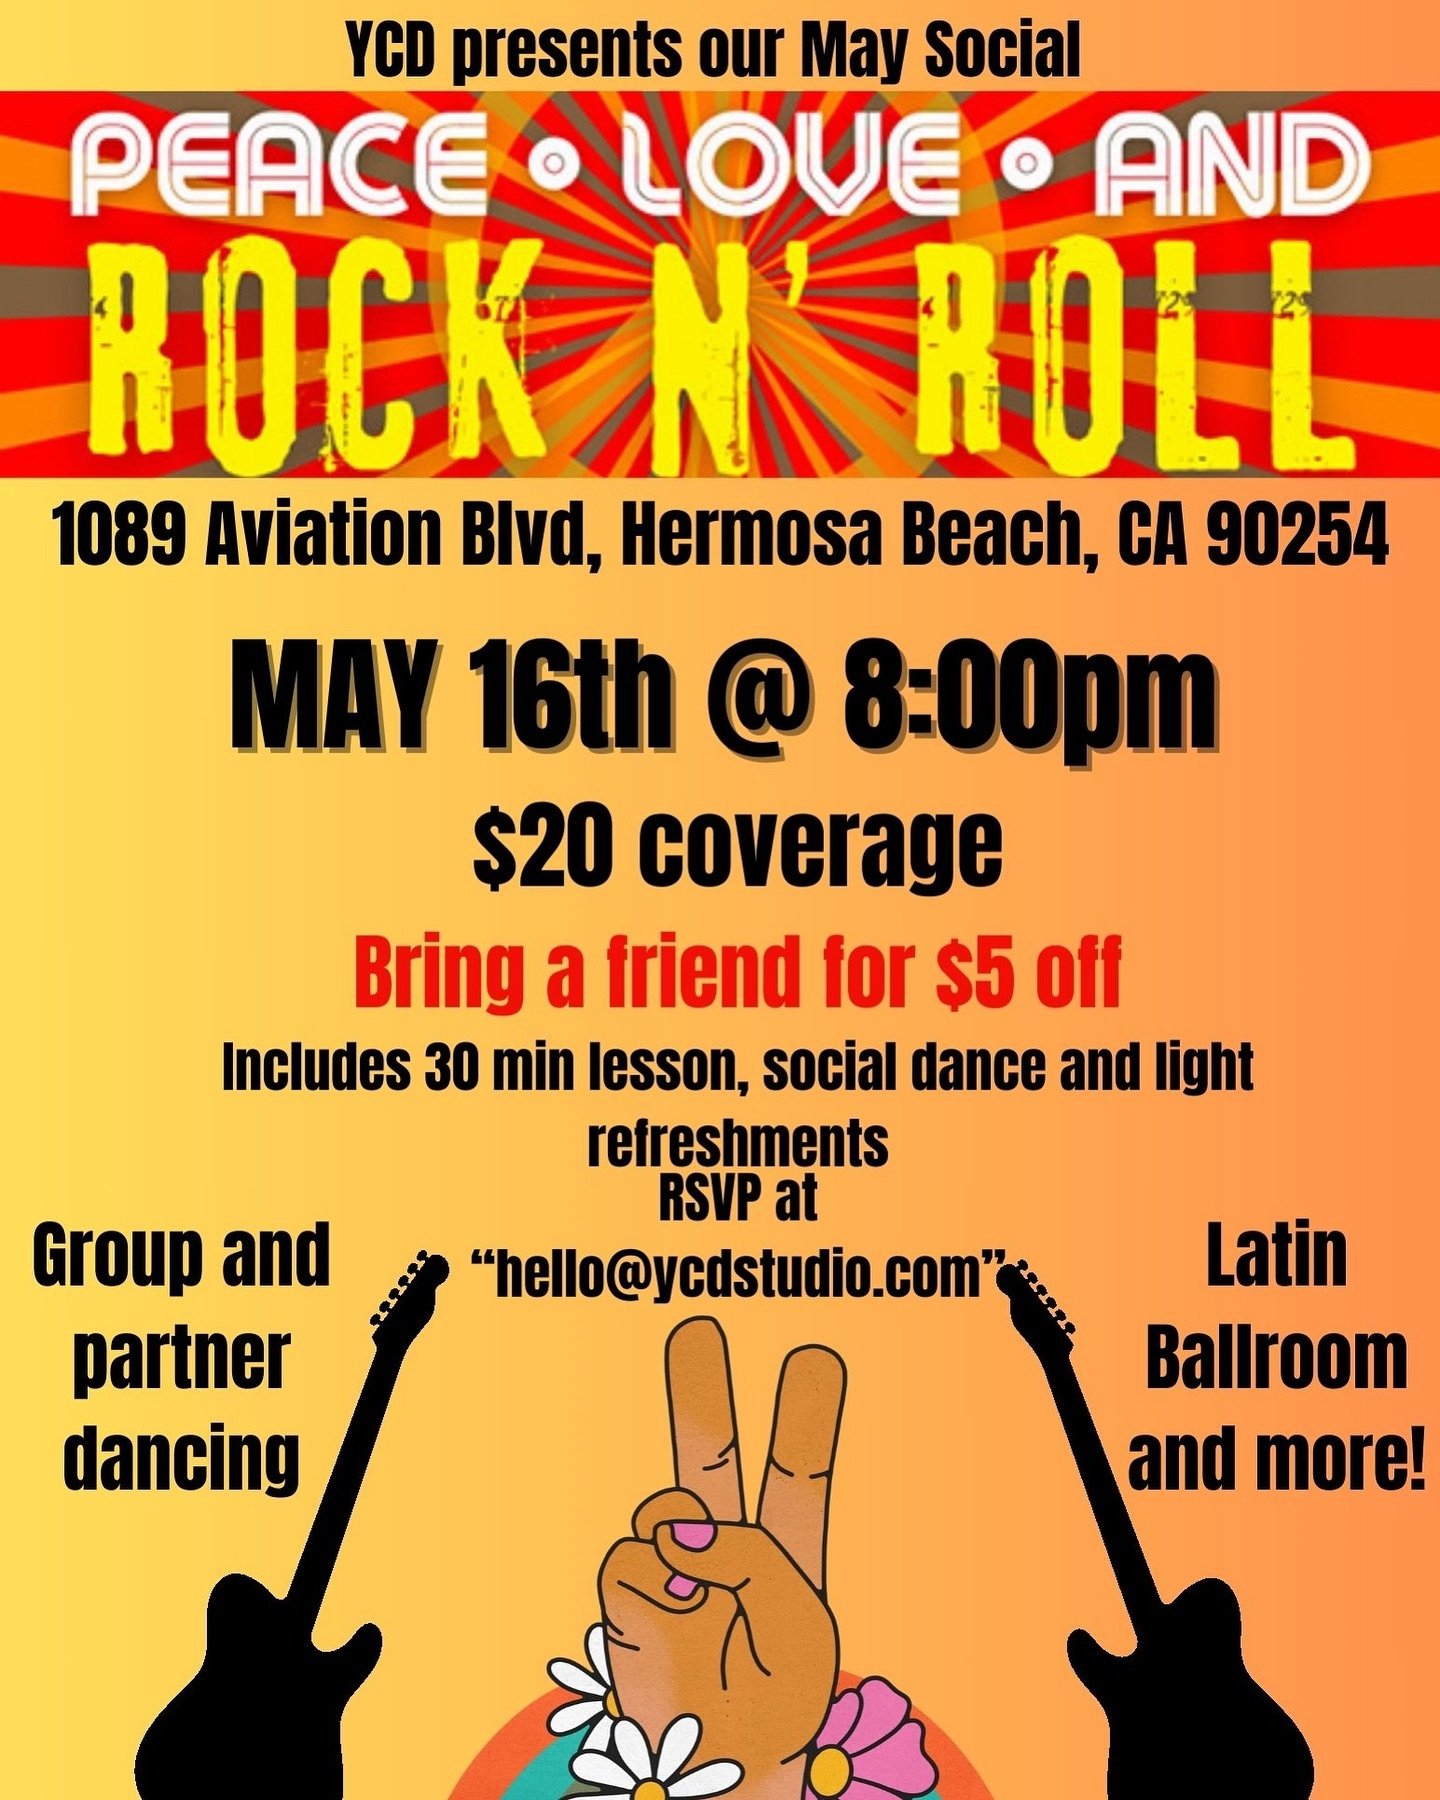 Join us this Thursday for a PEACE, LOVE AND ROCKIN&rsquo; social!! 

Dance the night away in your flower power or rocker gear!

What styles? Latin, ballroom, nightclub, and more! 

#socialdancing #latindancing #ballroomdancing